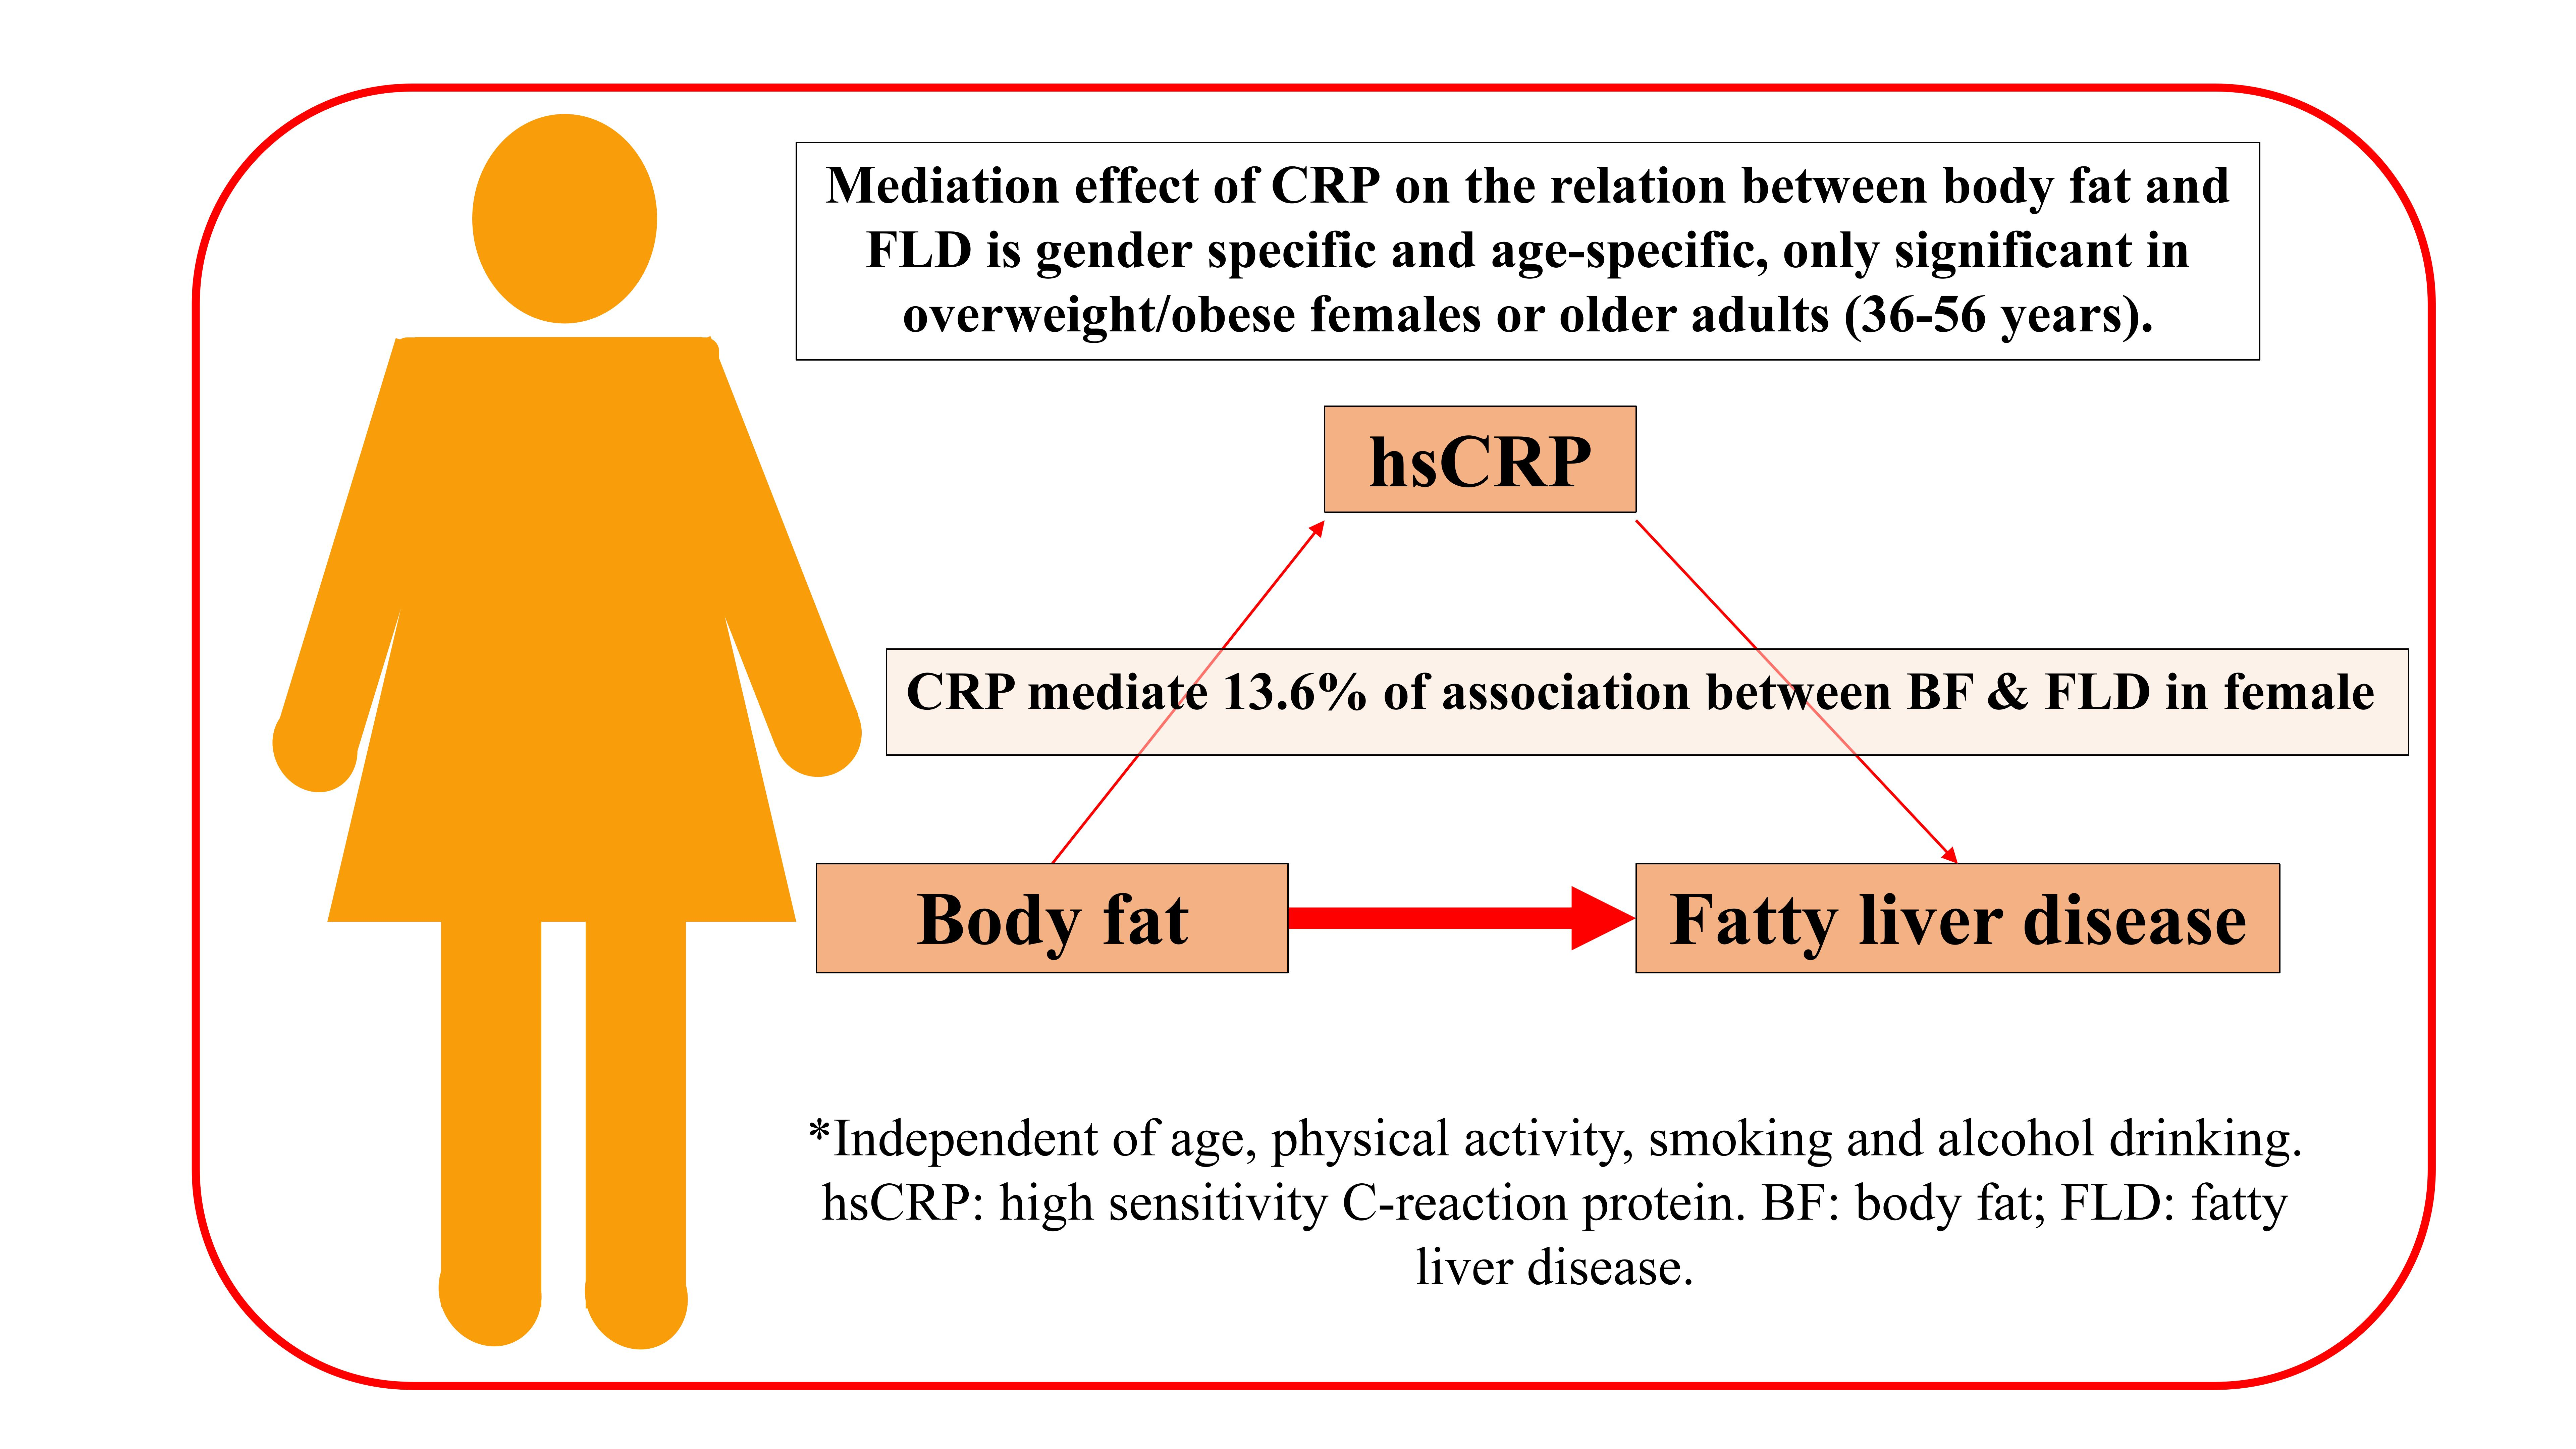 Biology Free Full-Text Mediating Roles of hsCRP, TNF-α and Adiponectin on the Associations between Body Fat and Fatty Liver Disease among Overweight and Obese Adults photo image